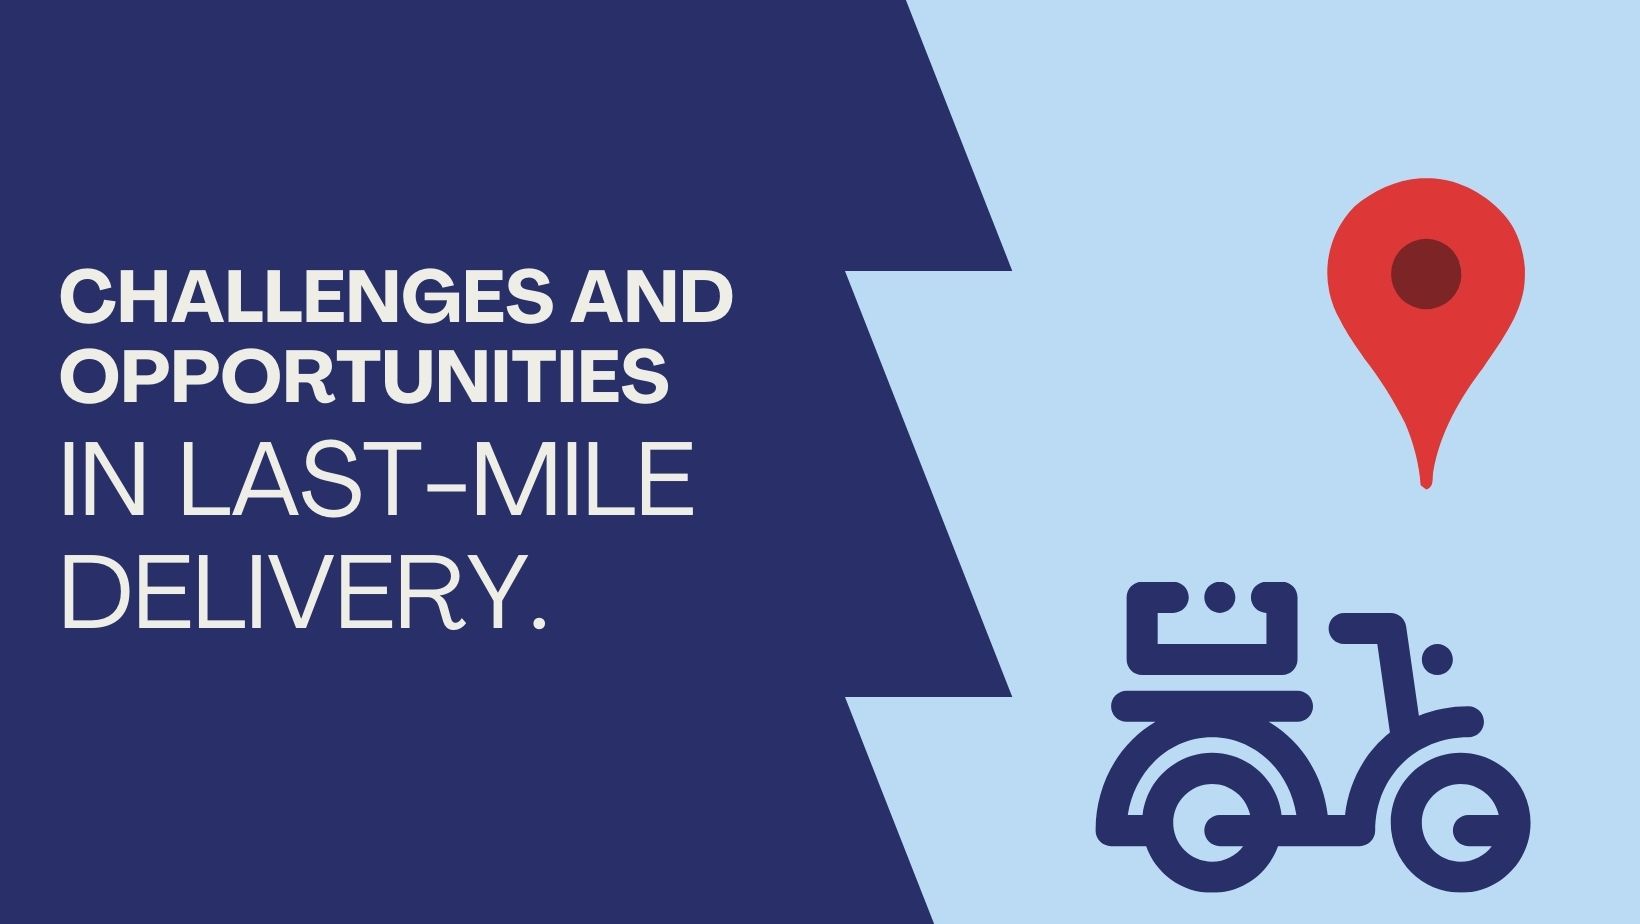 _Last-Mile delivery Challenges and Opportunities